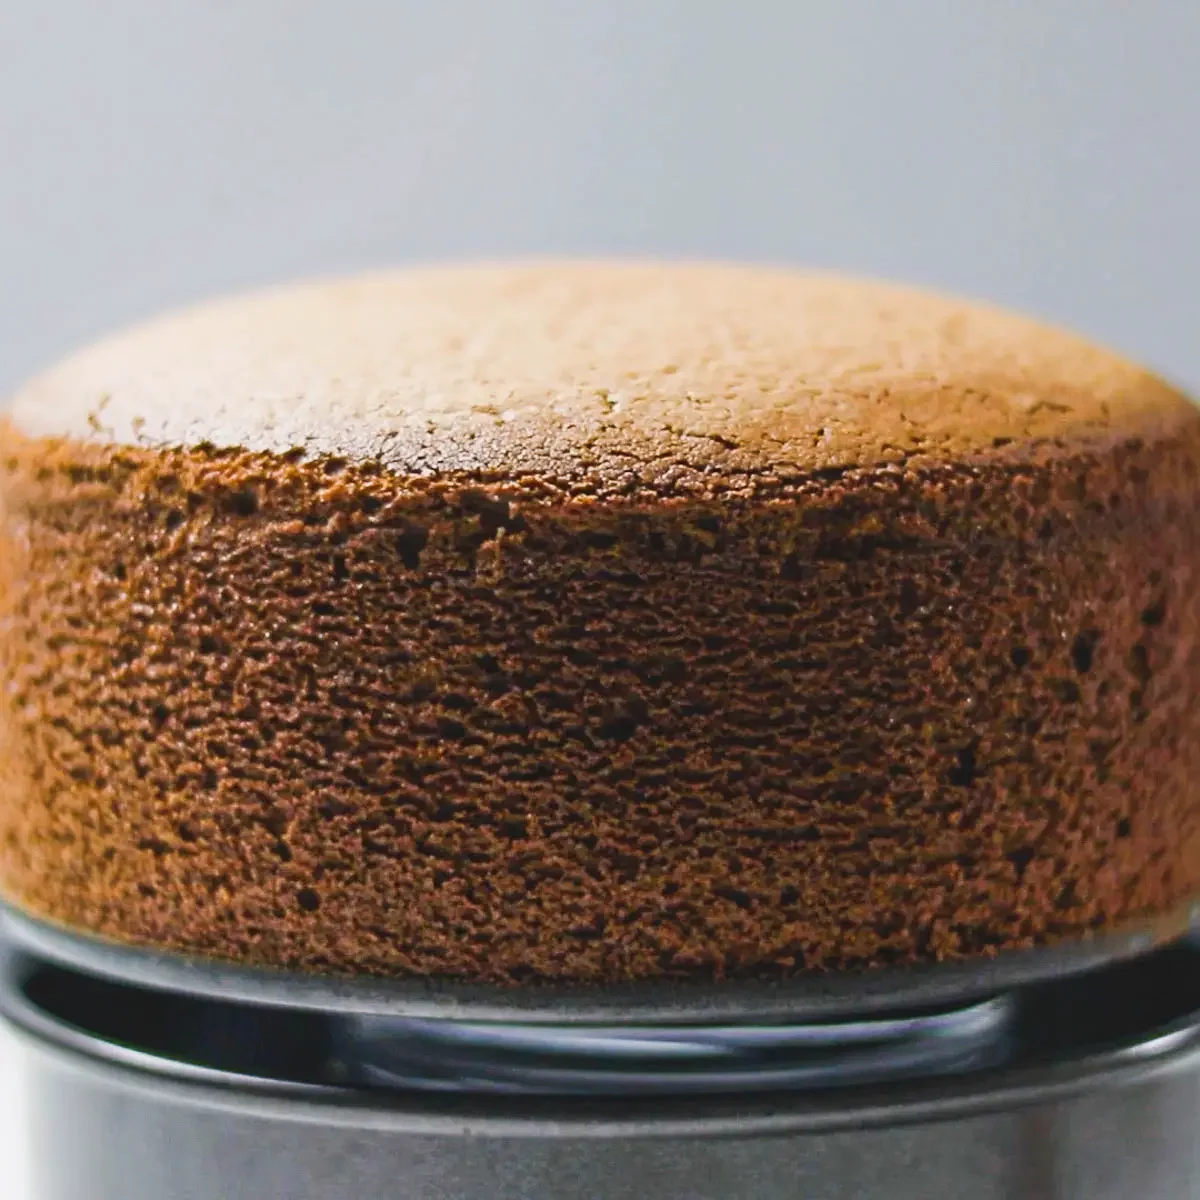 Only 4 Ingredients! How to Make a Fluffy Chocolate Souffle Cheesecake